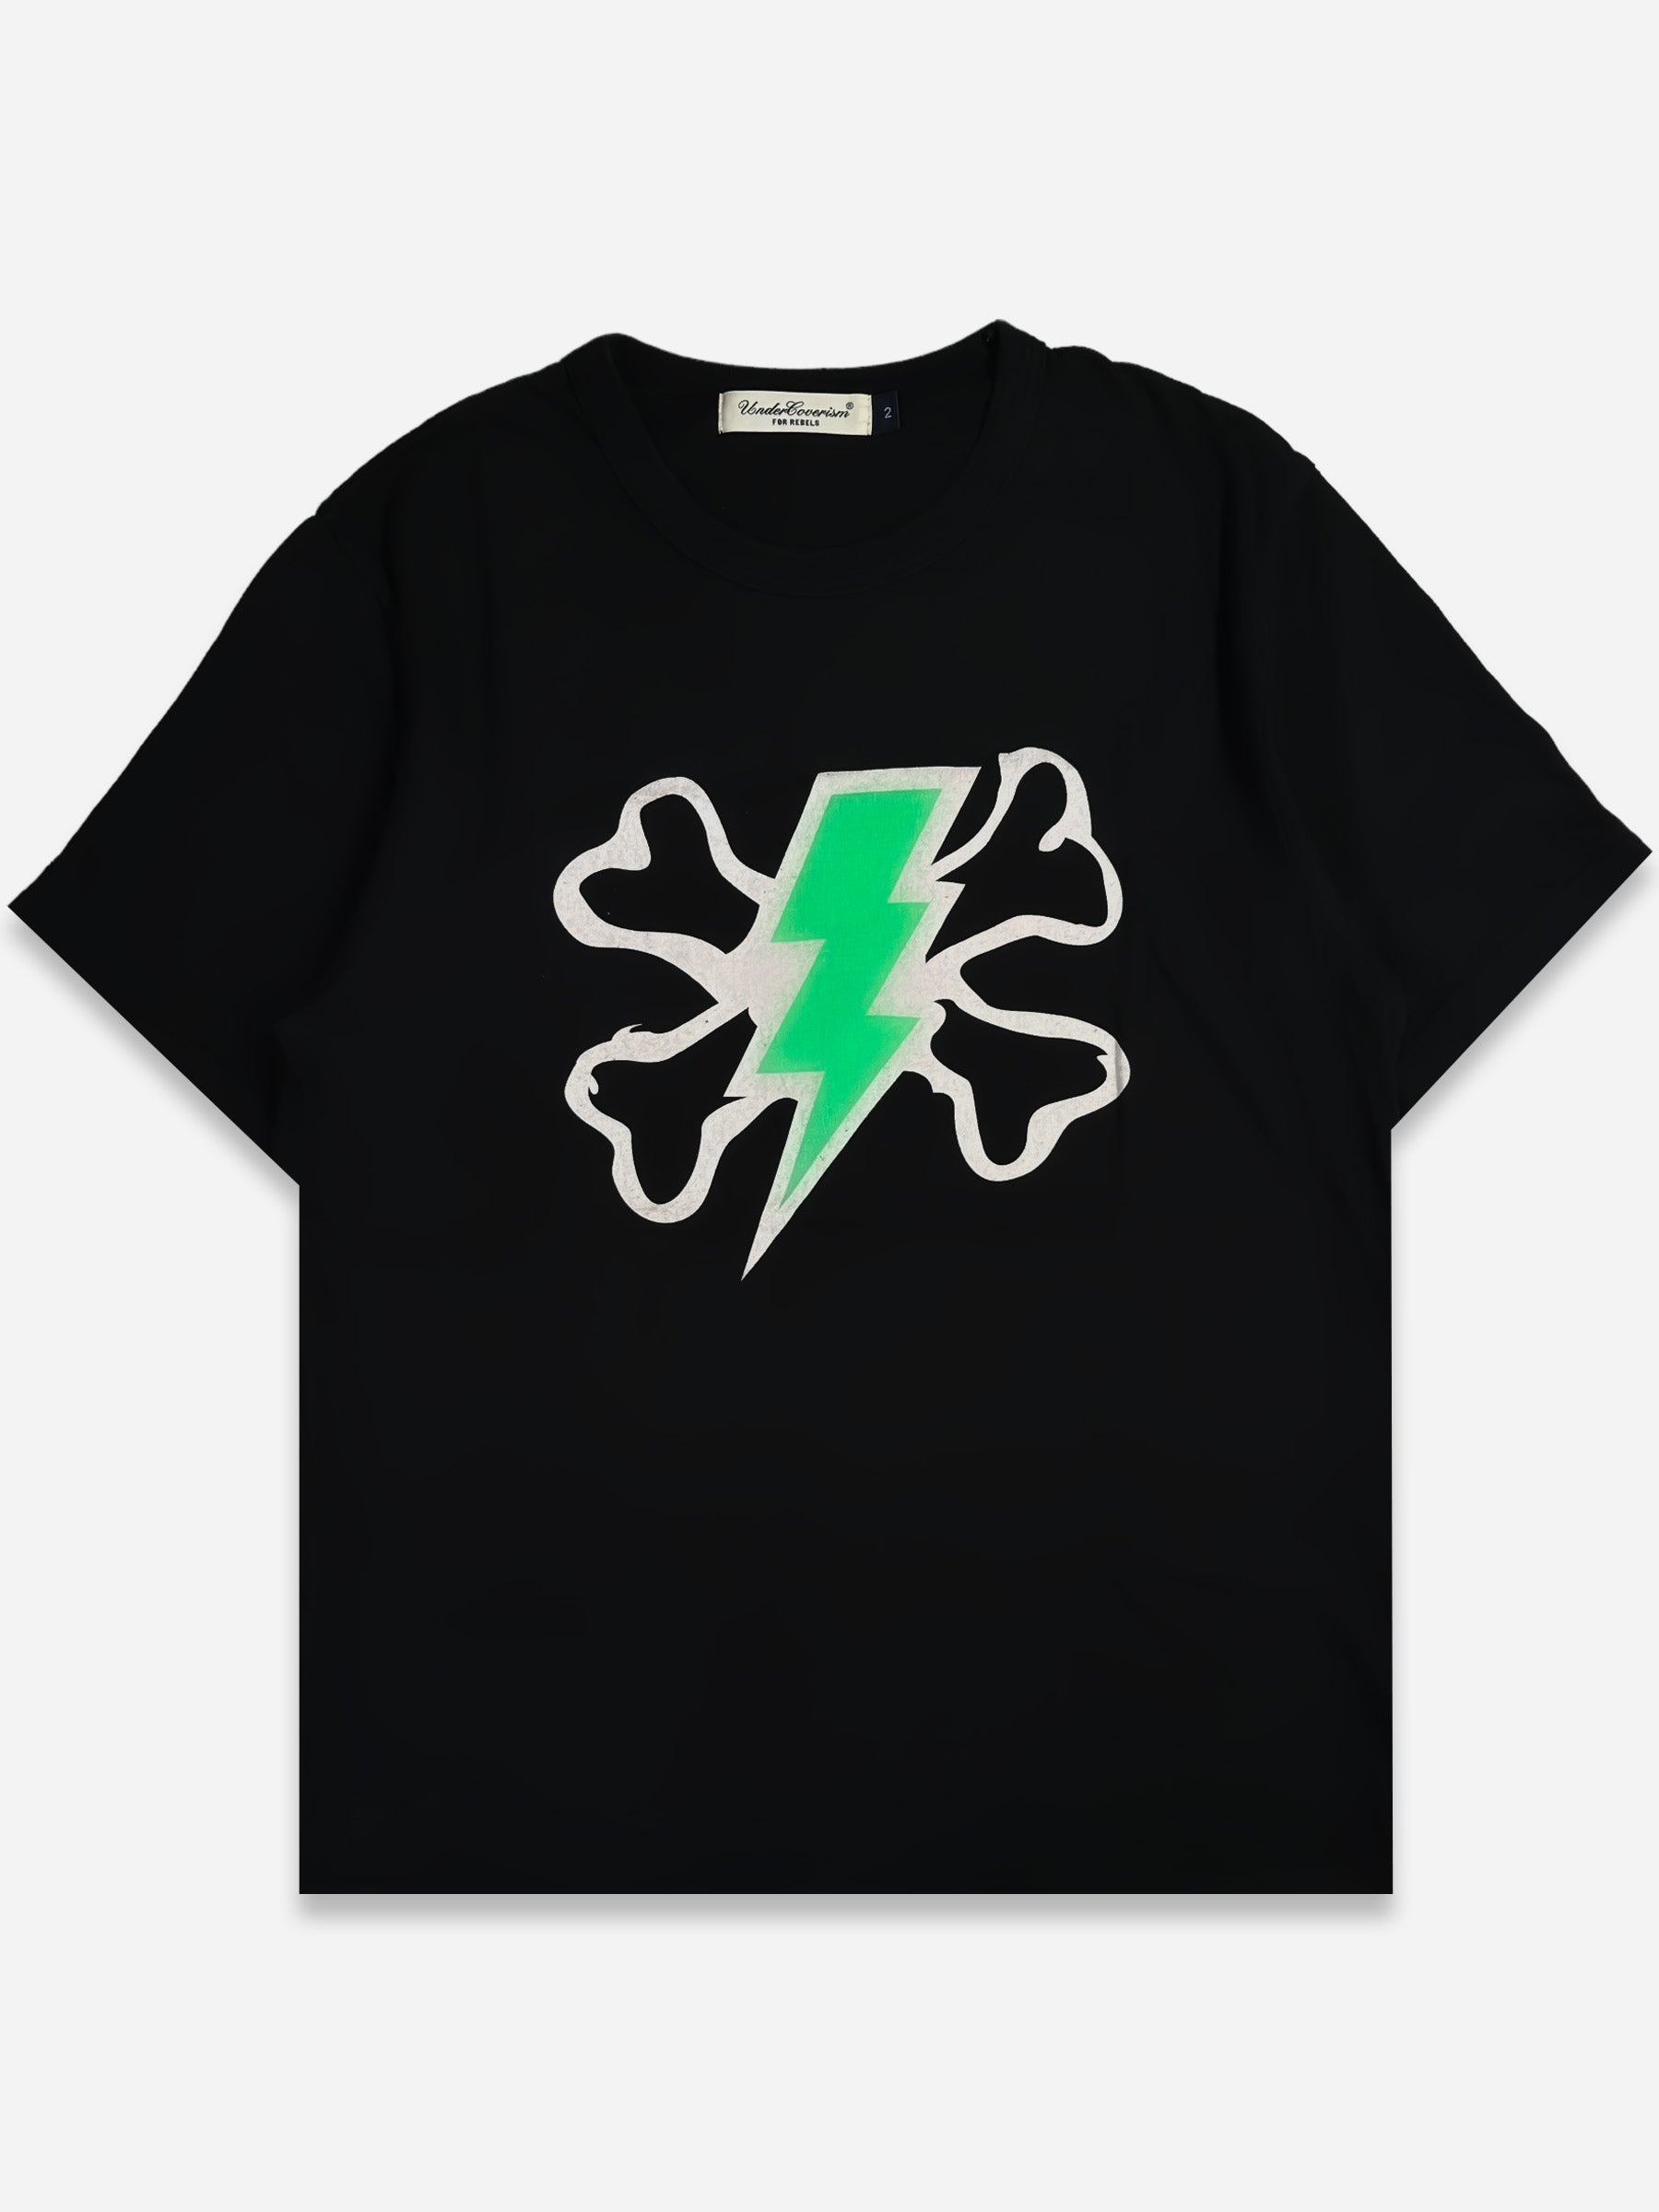 01ss under cover chaotic discord t-shirt